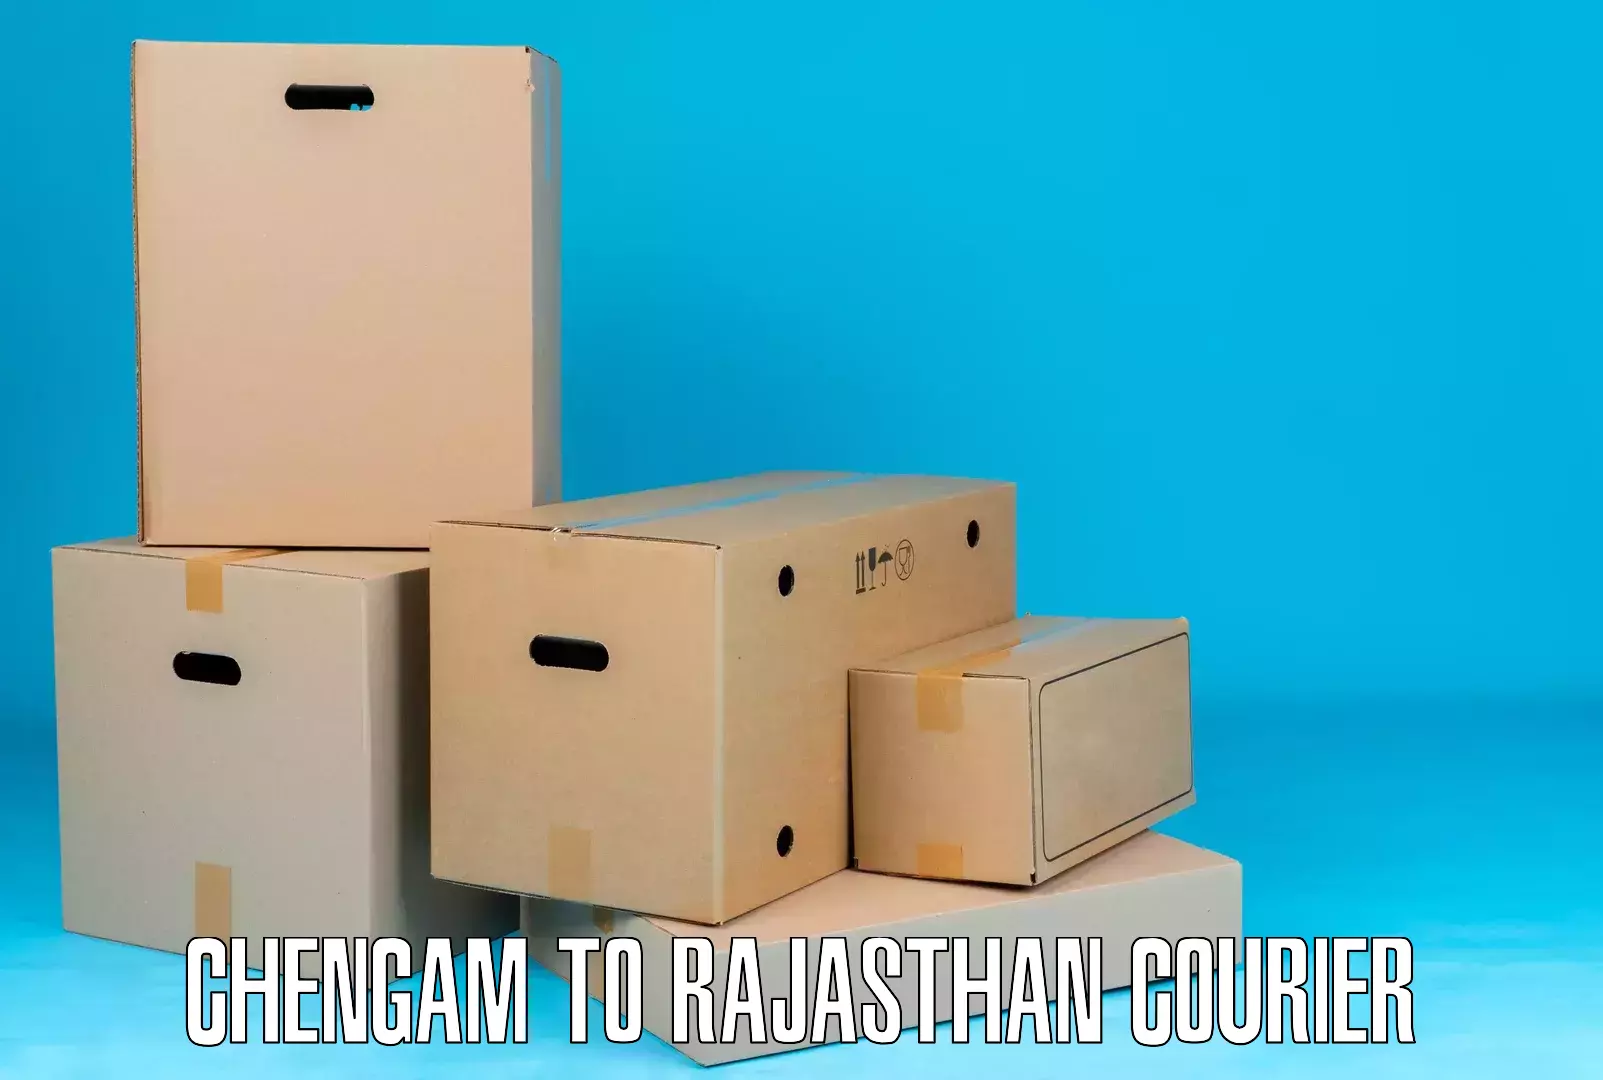 Logistics service provider Chengam to Yeswanthapur